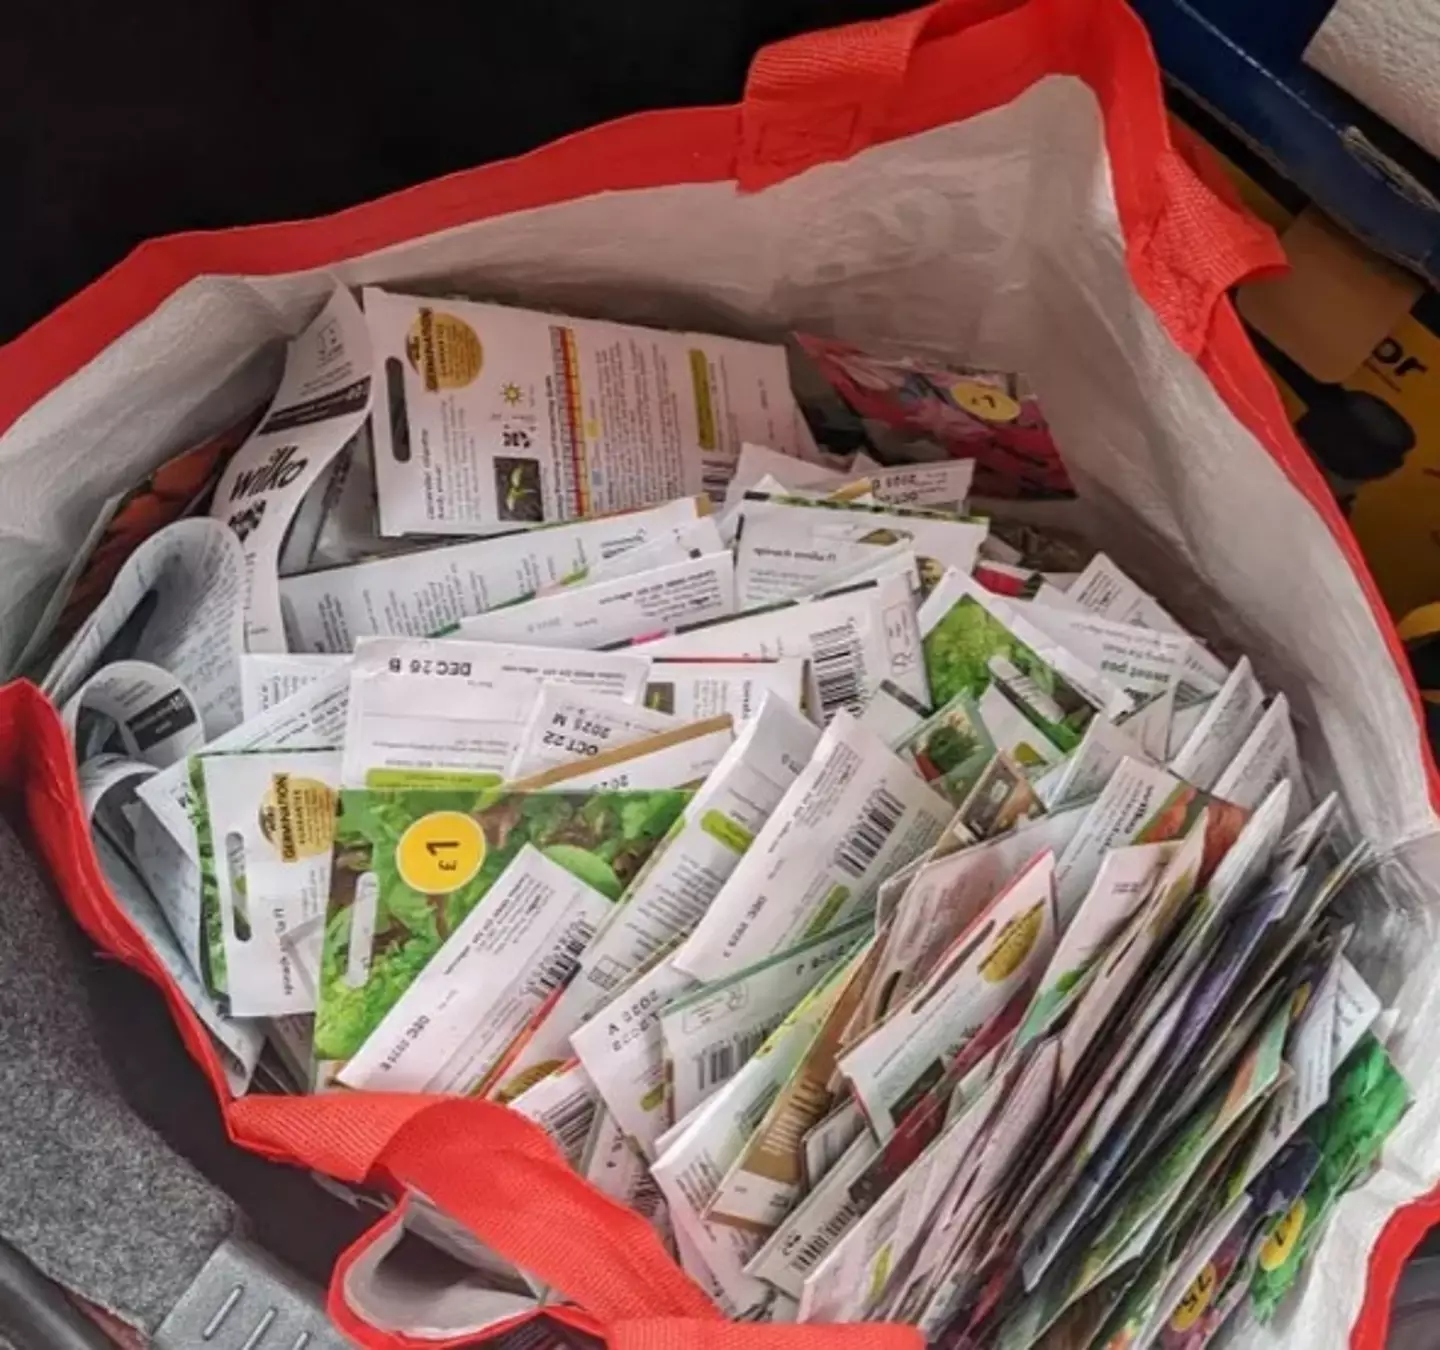 At 5p per packet, Sara was able to buy 533 bags of seeds for £26.65.